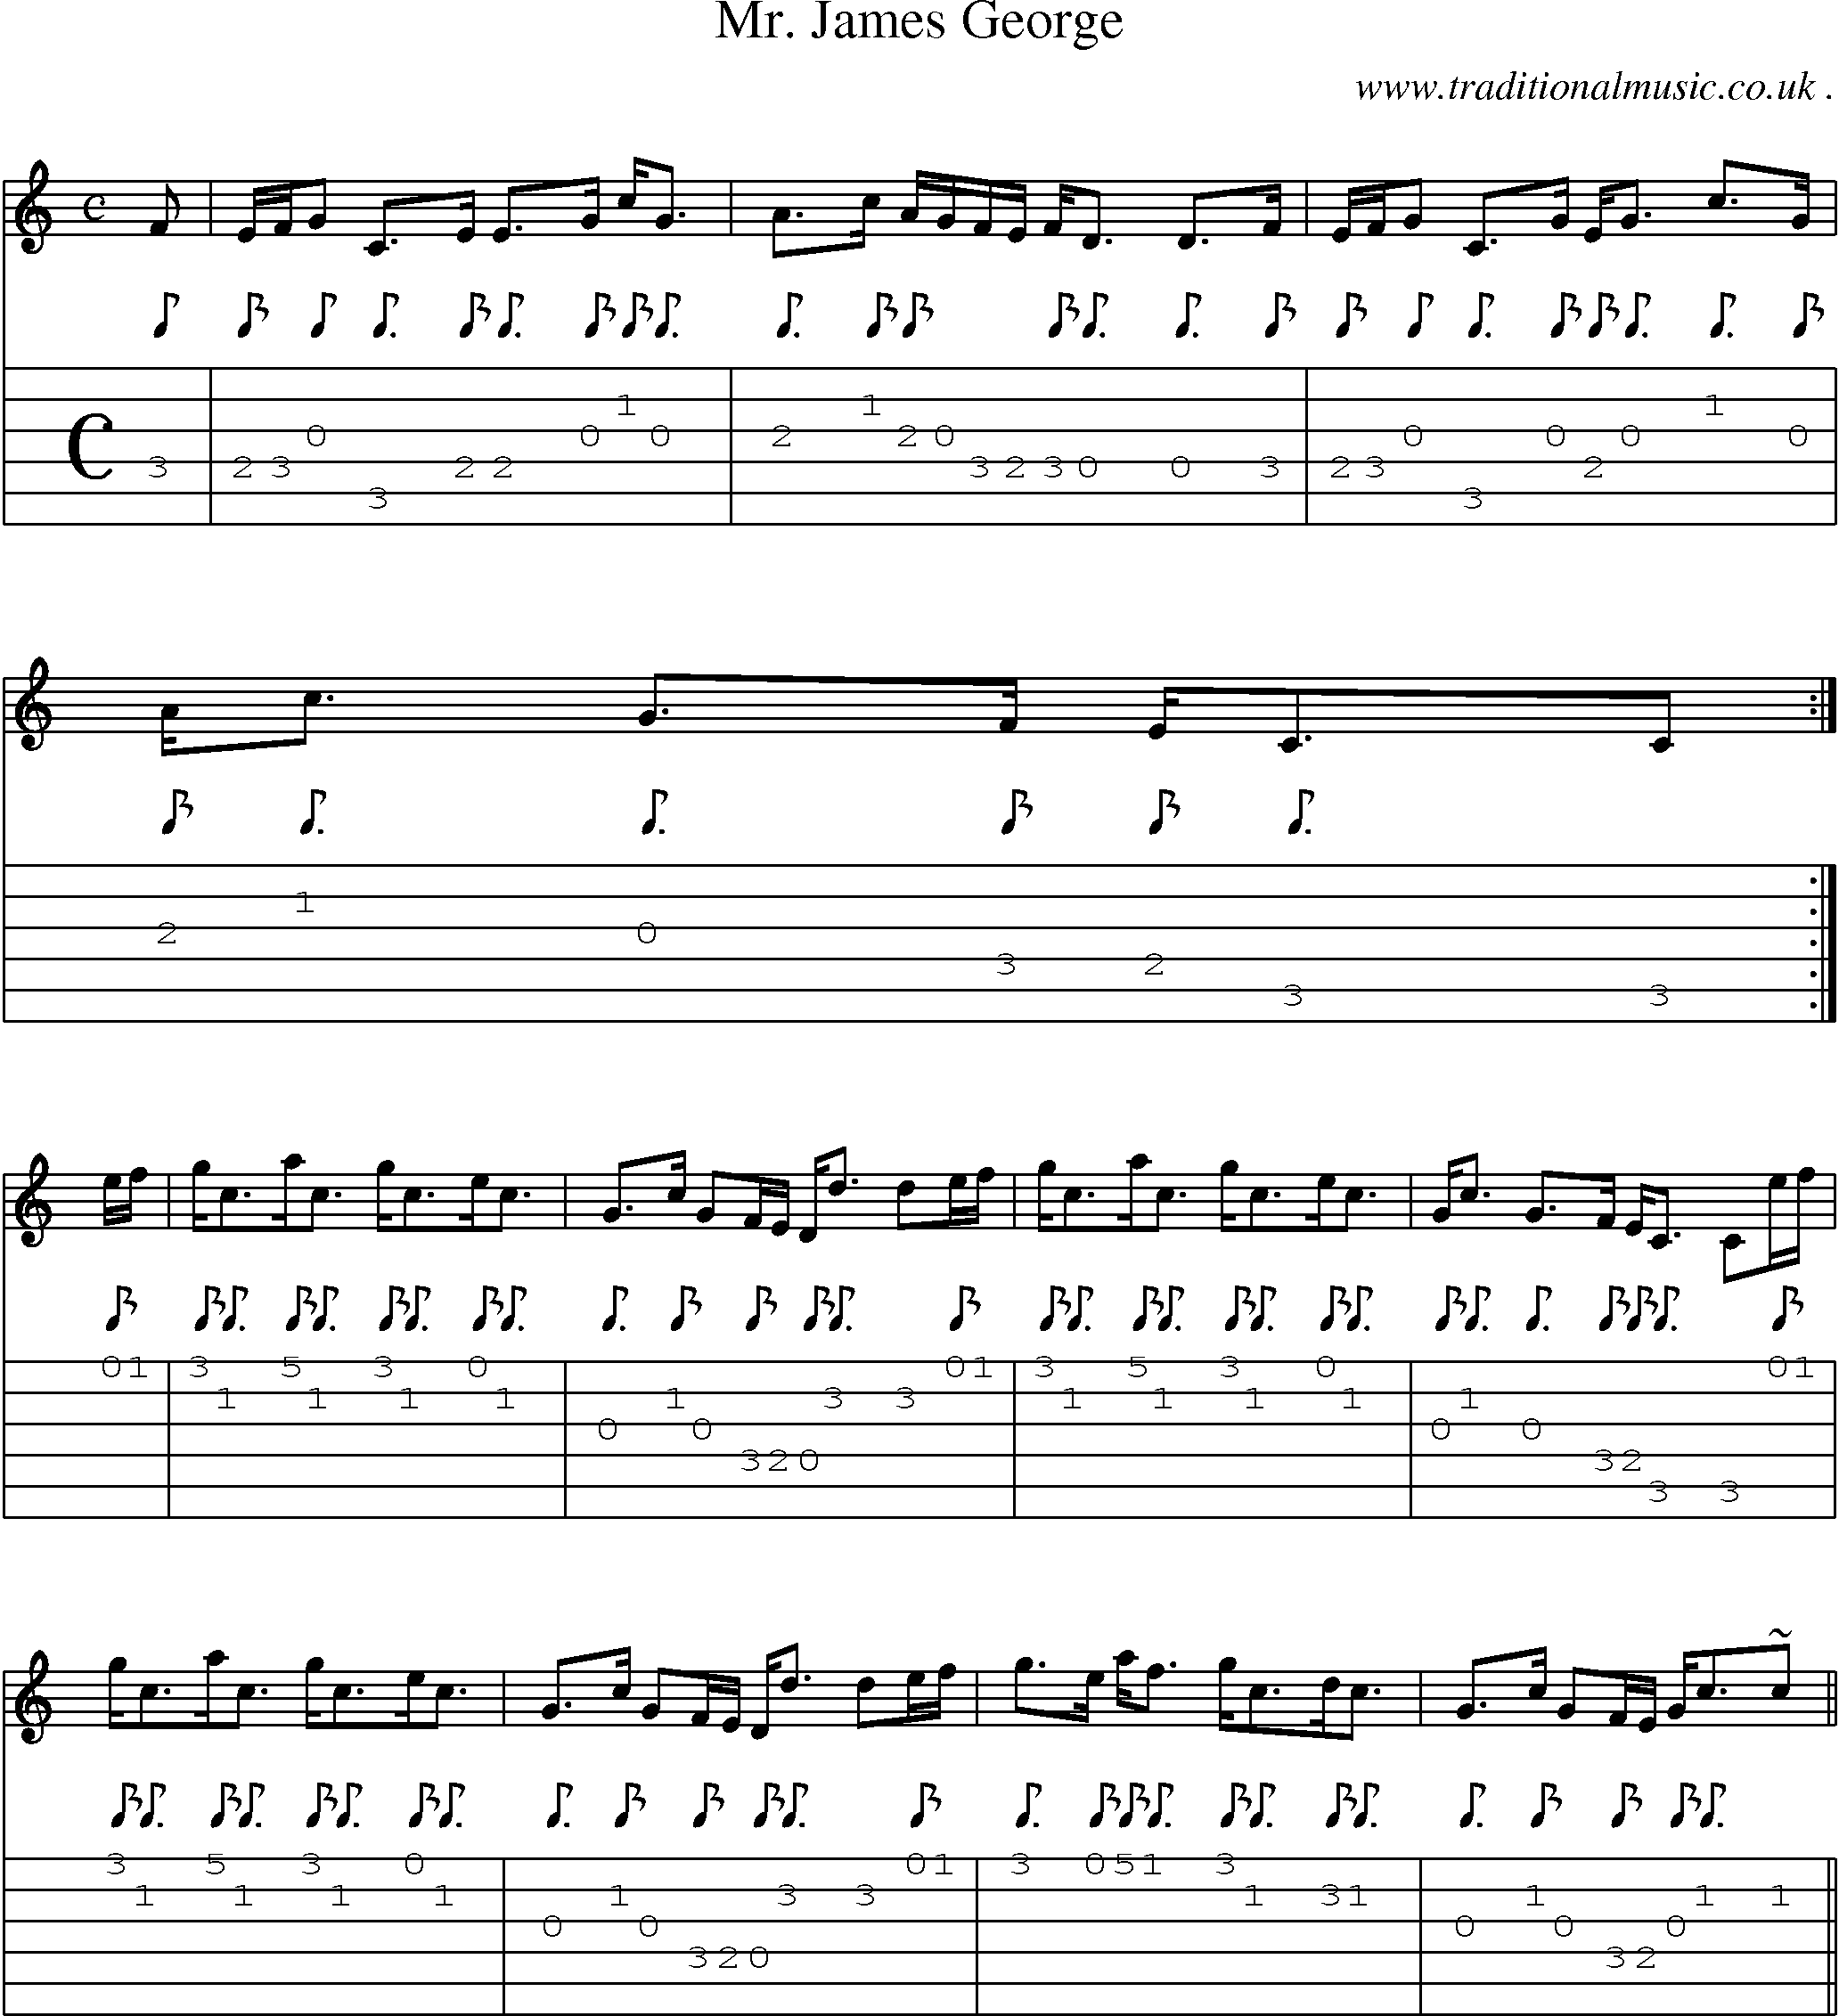 Sheet-music  score, Chords and Guitar Tabs for Mr James George